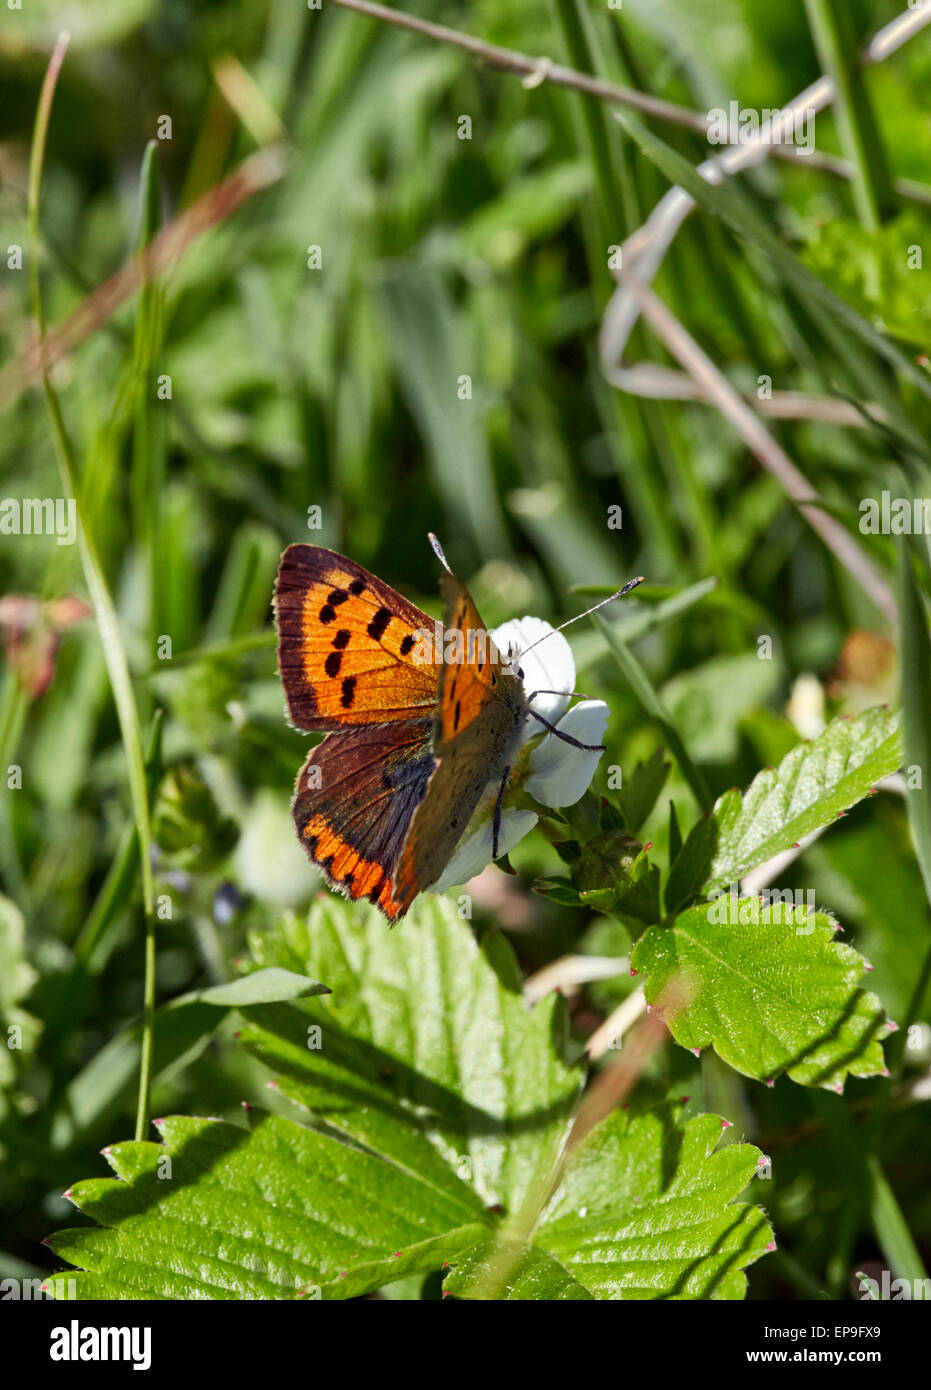 Small Copper butterfly on wild strawberry flower. Fairmile Common, Esher, Surrey, England. Stock Photo